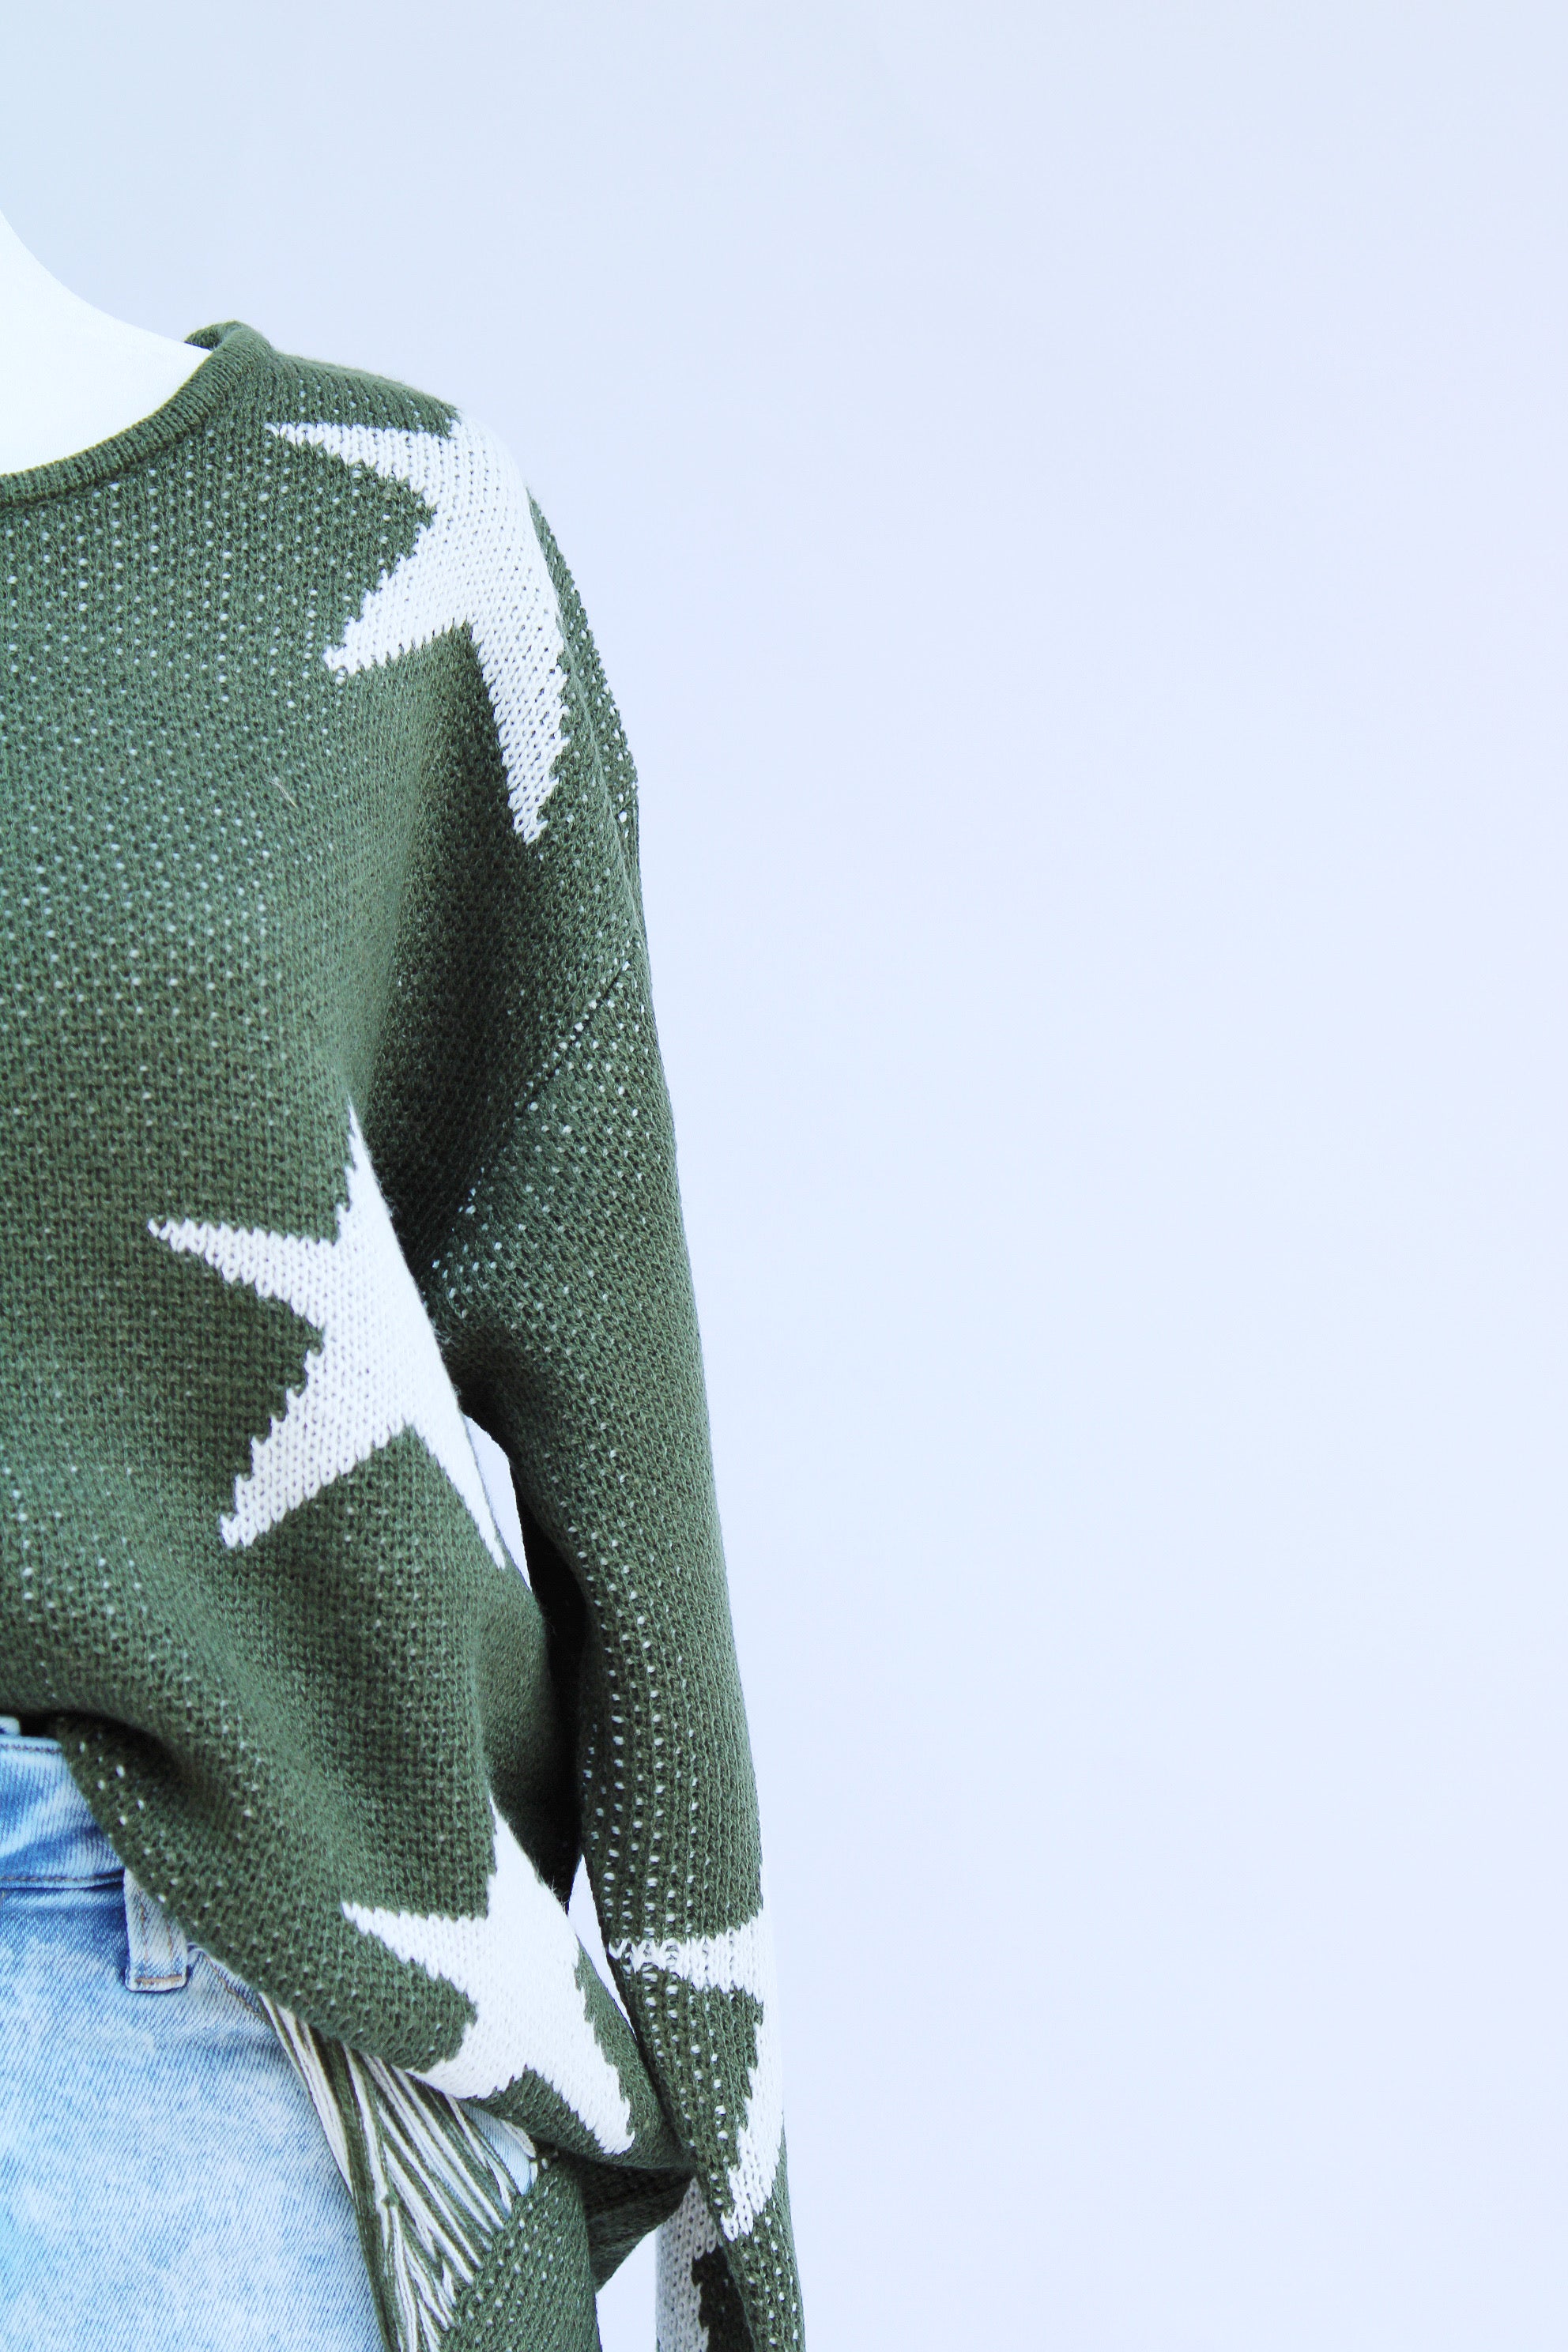 Distressed Star Sweater in Army Green